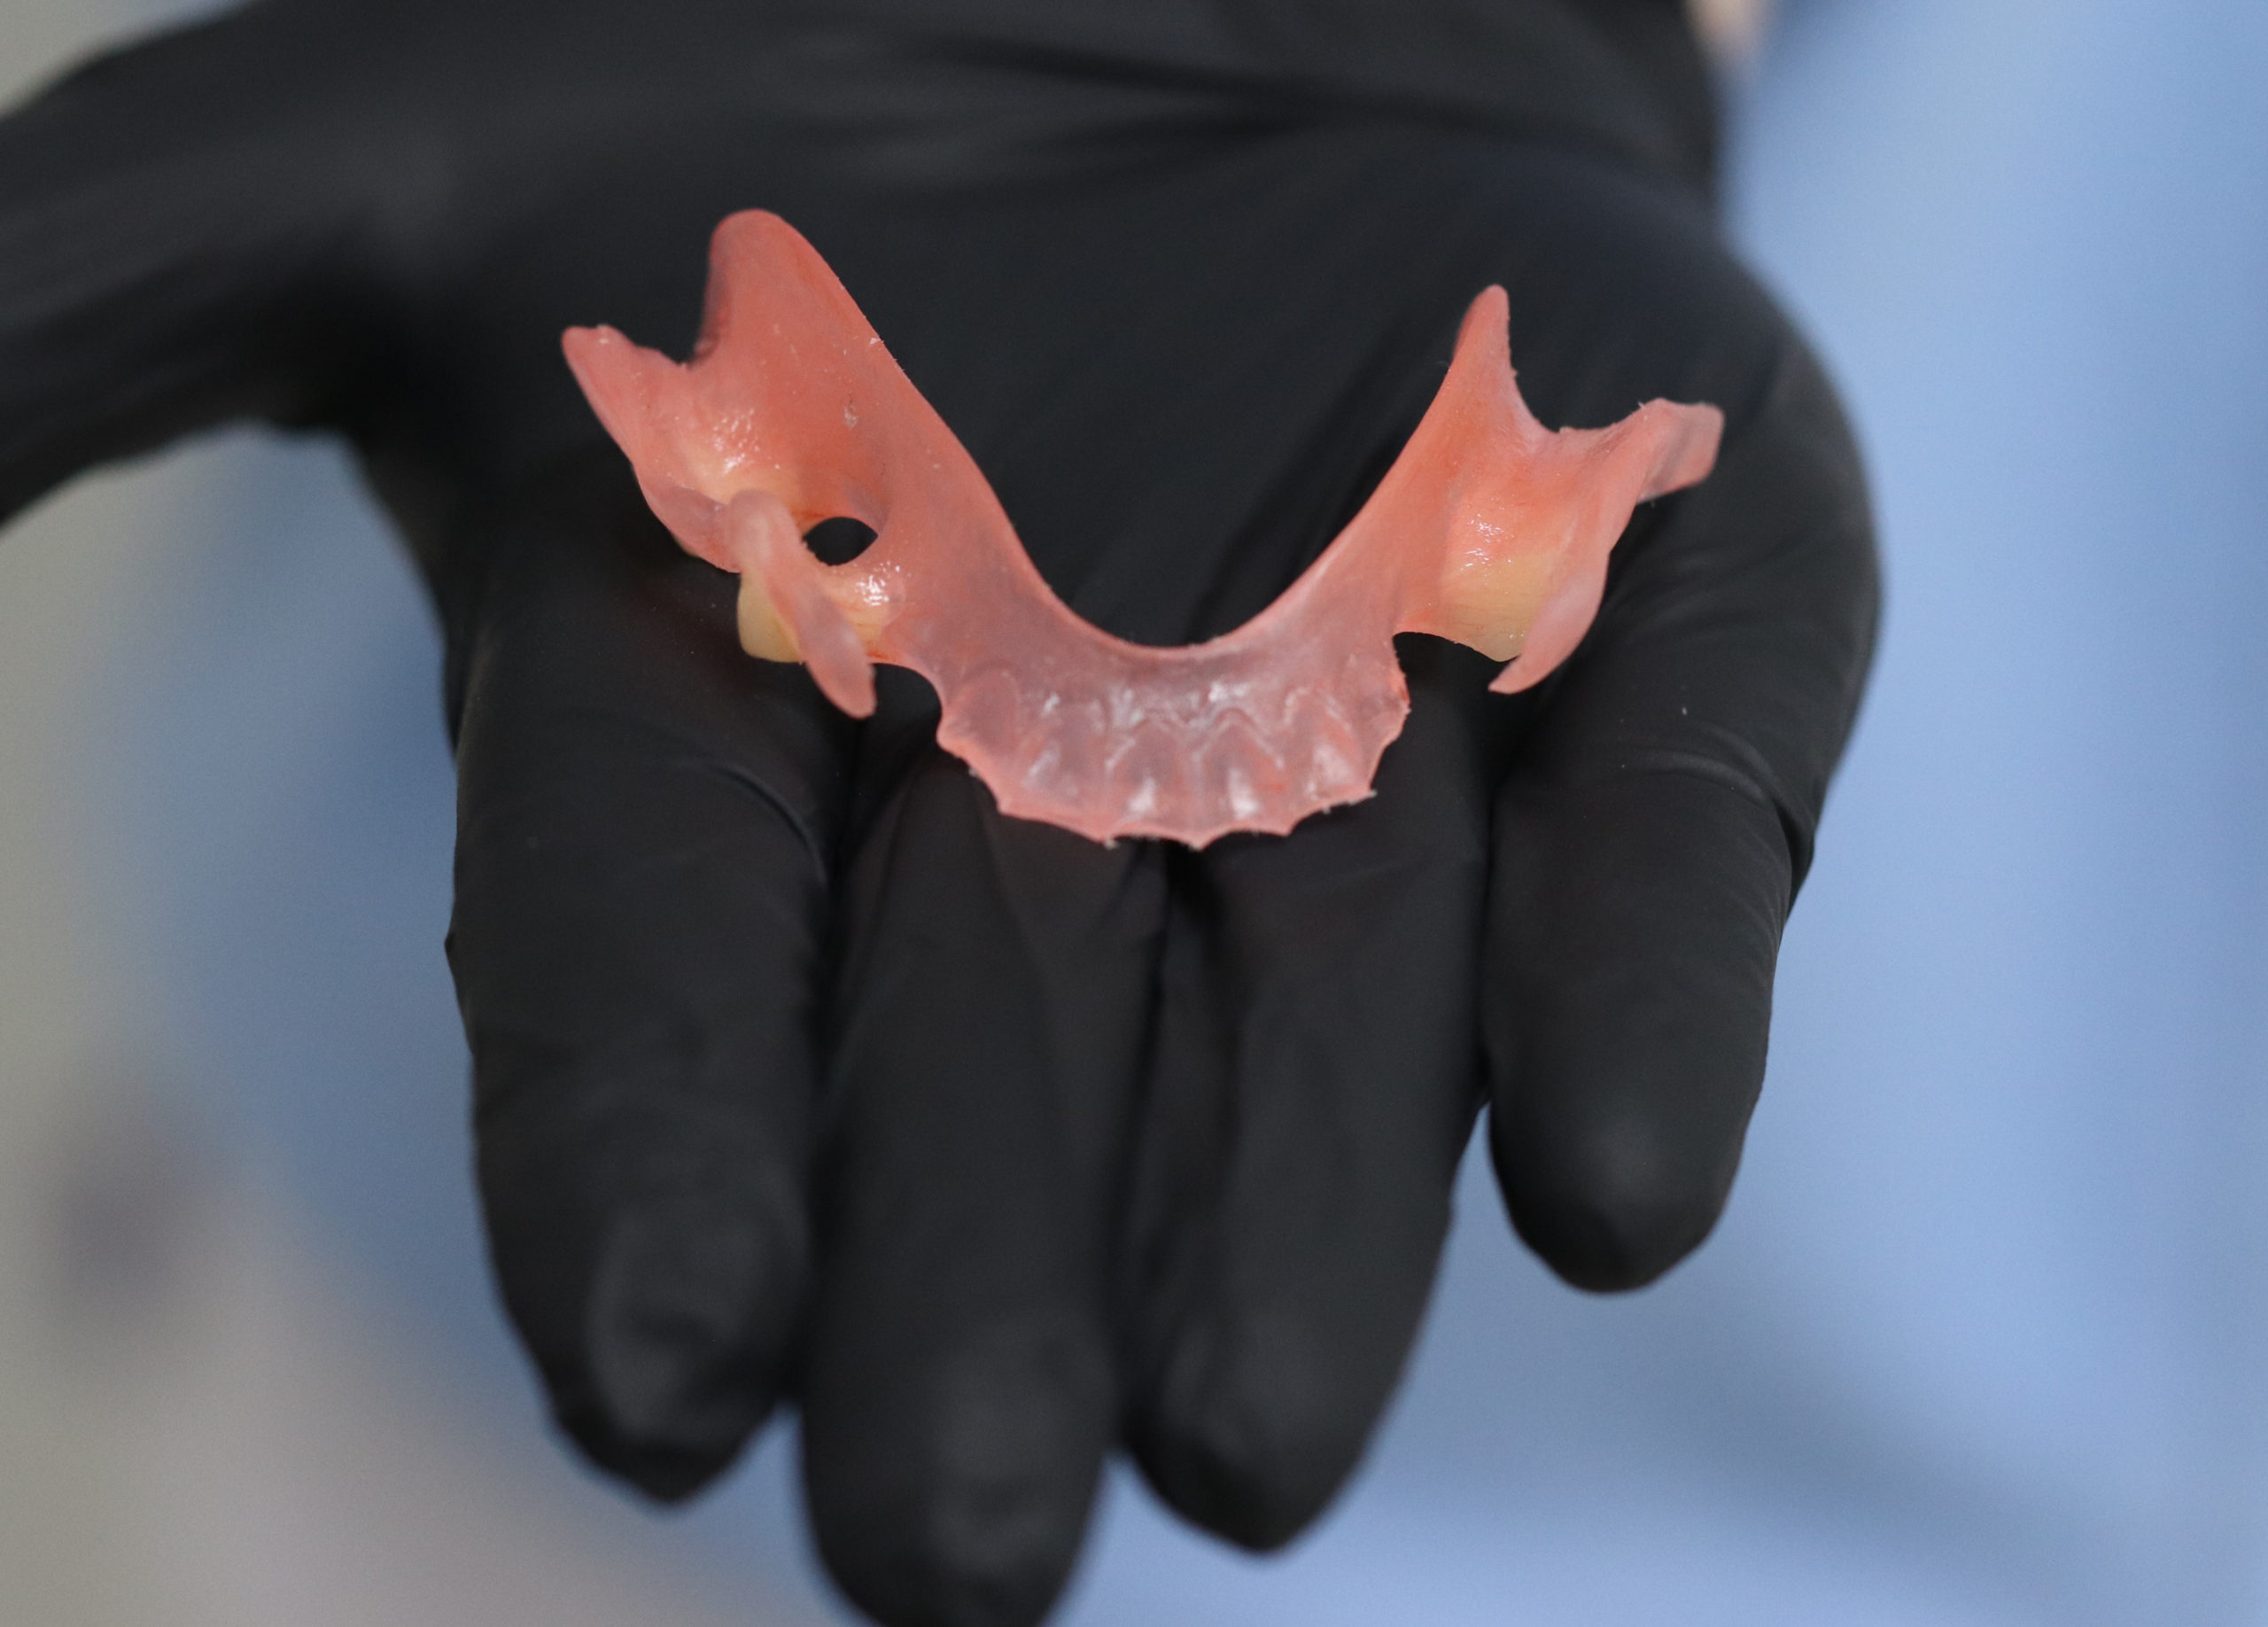 Flexible and removable dentures